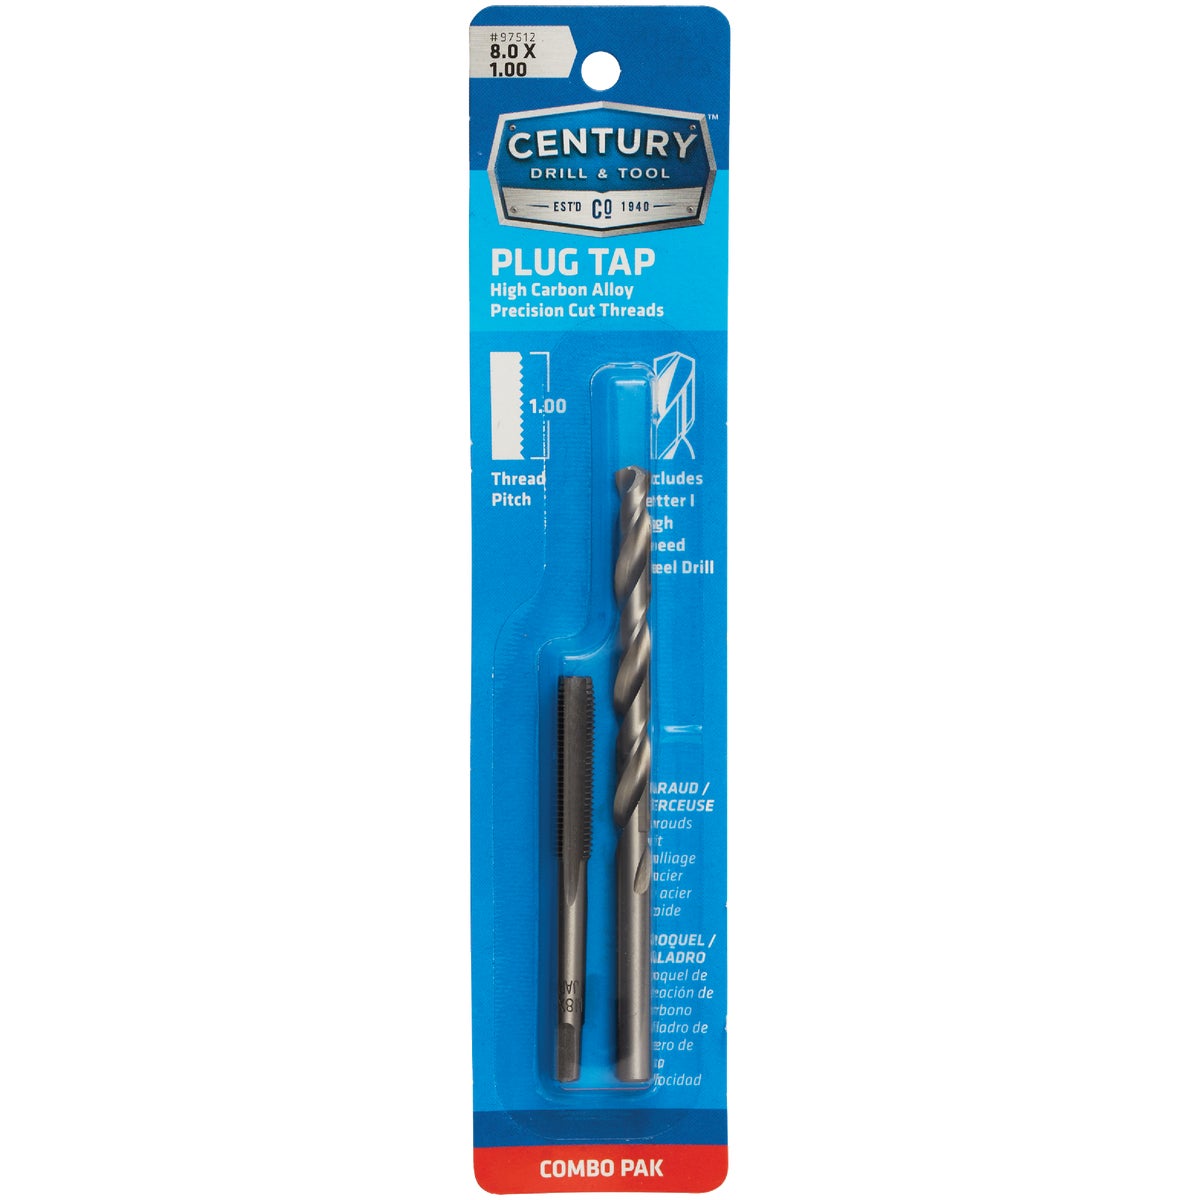 Century Drill & Tool 8 mm x 1.0 Metric Tap & I Letter Drill Bit Combo Pack